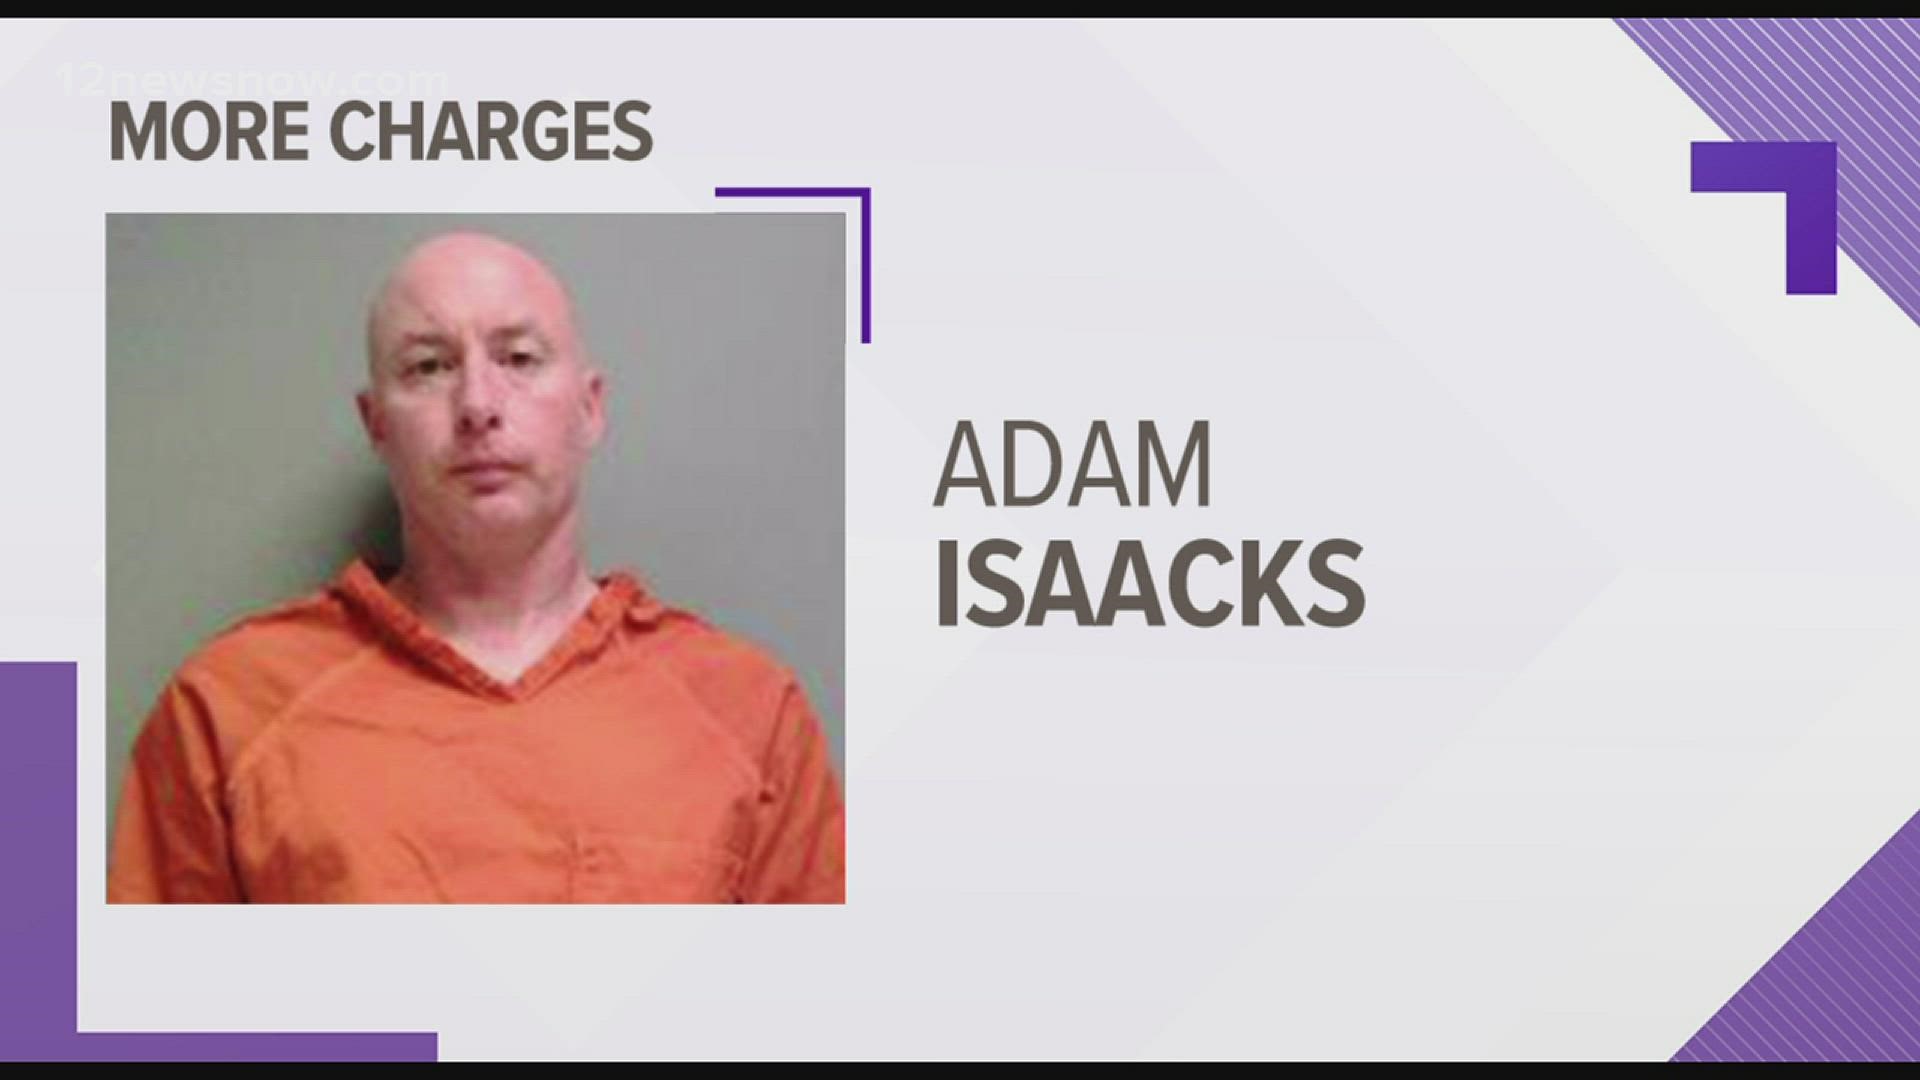 Adam Isaacks faces five charges in Sabine County and three in Jasper County.